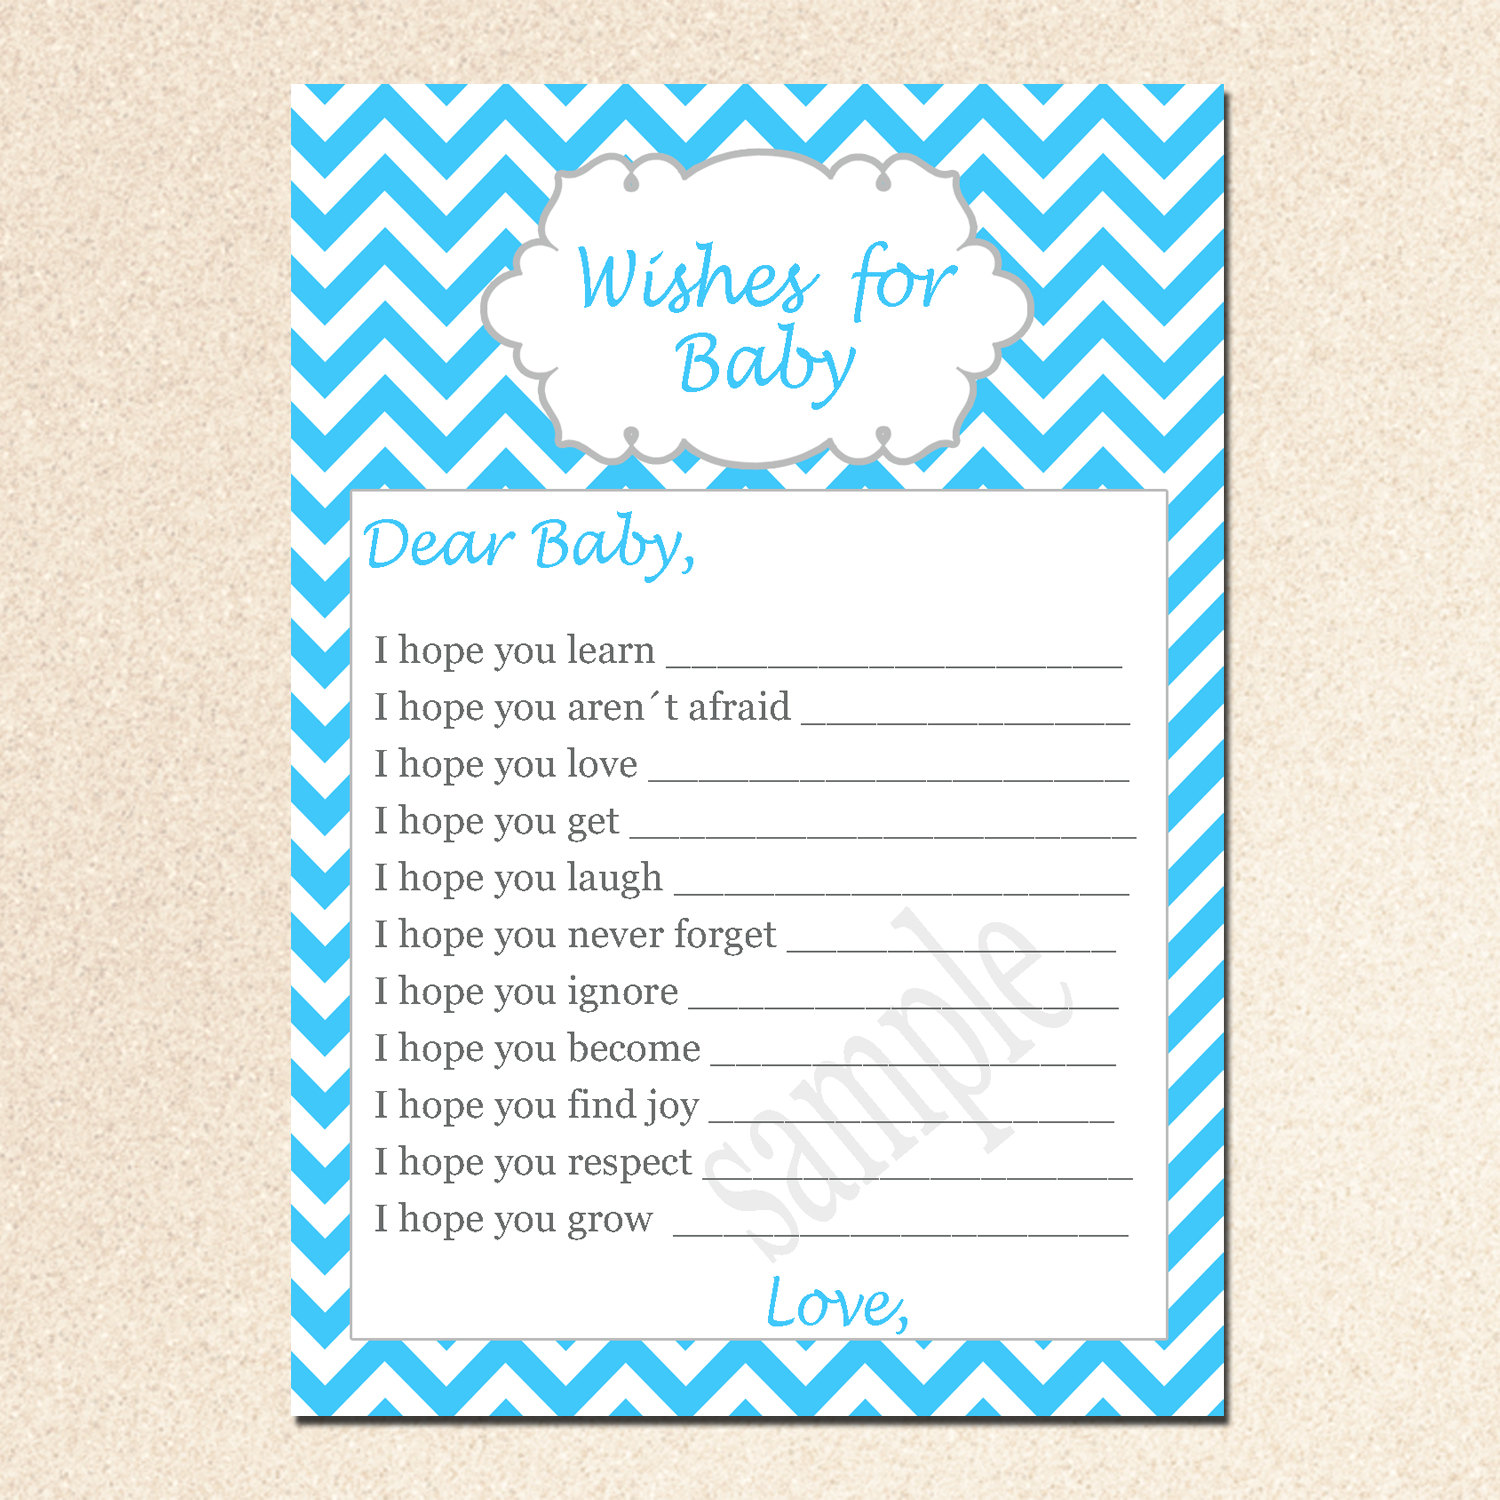 Baby Printable Images Gallery Category Page 1